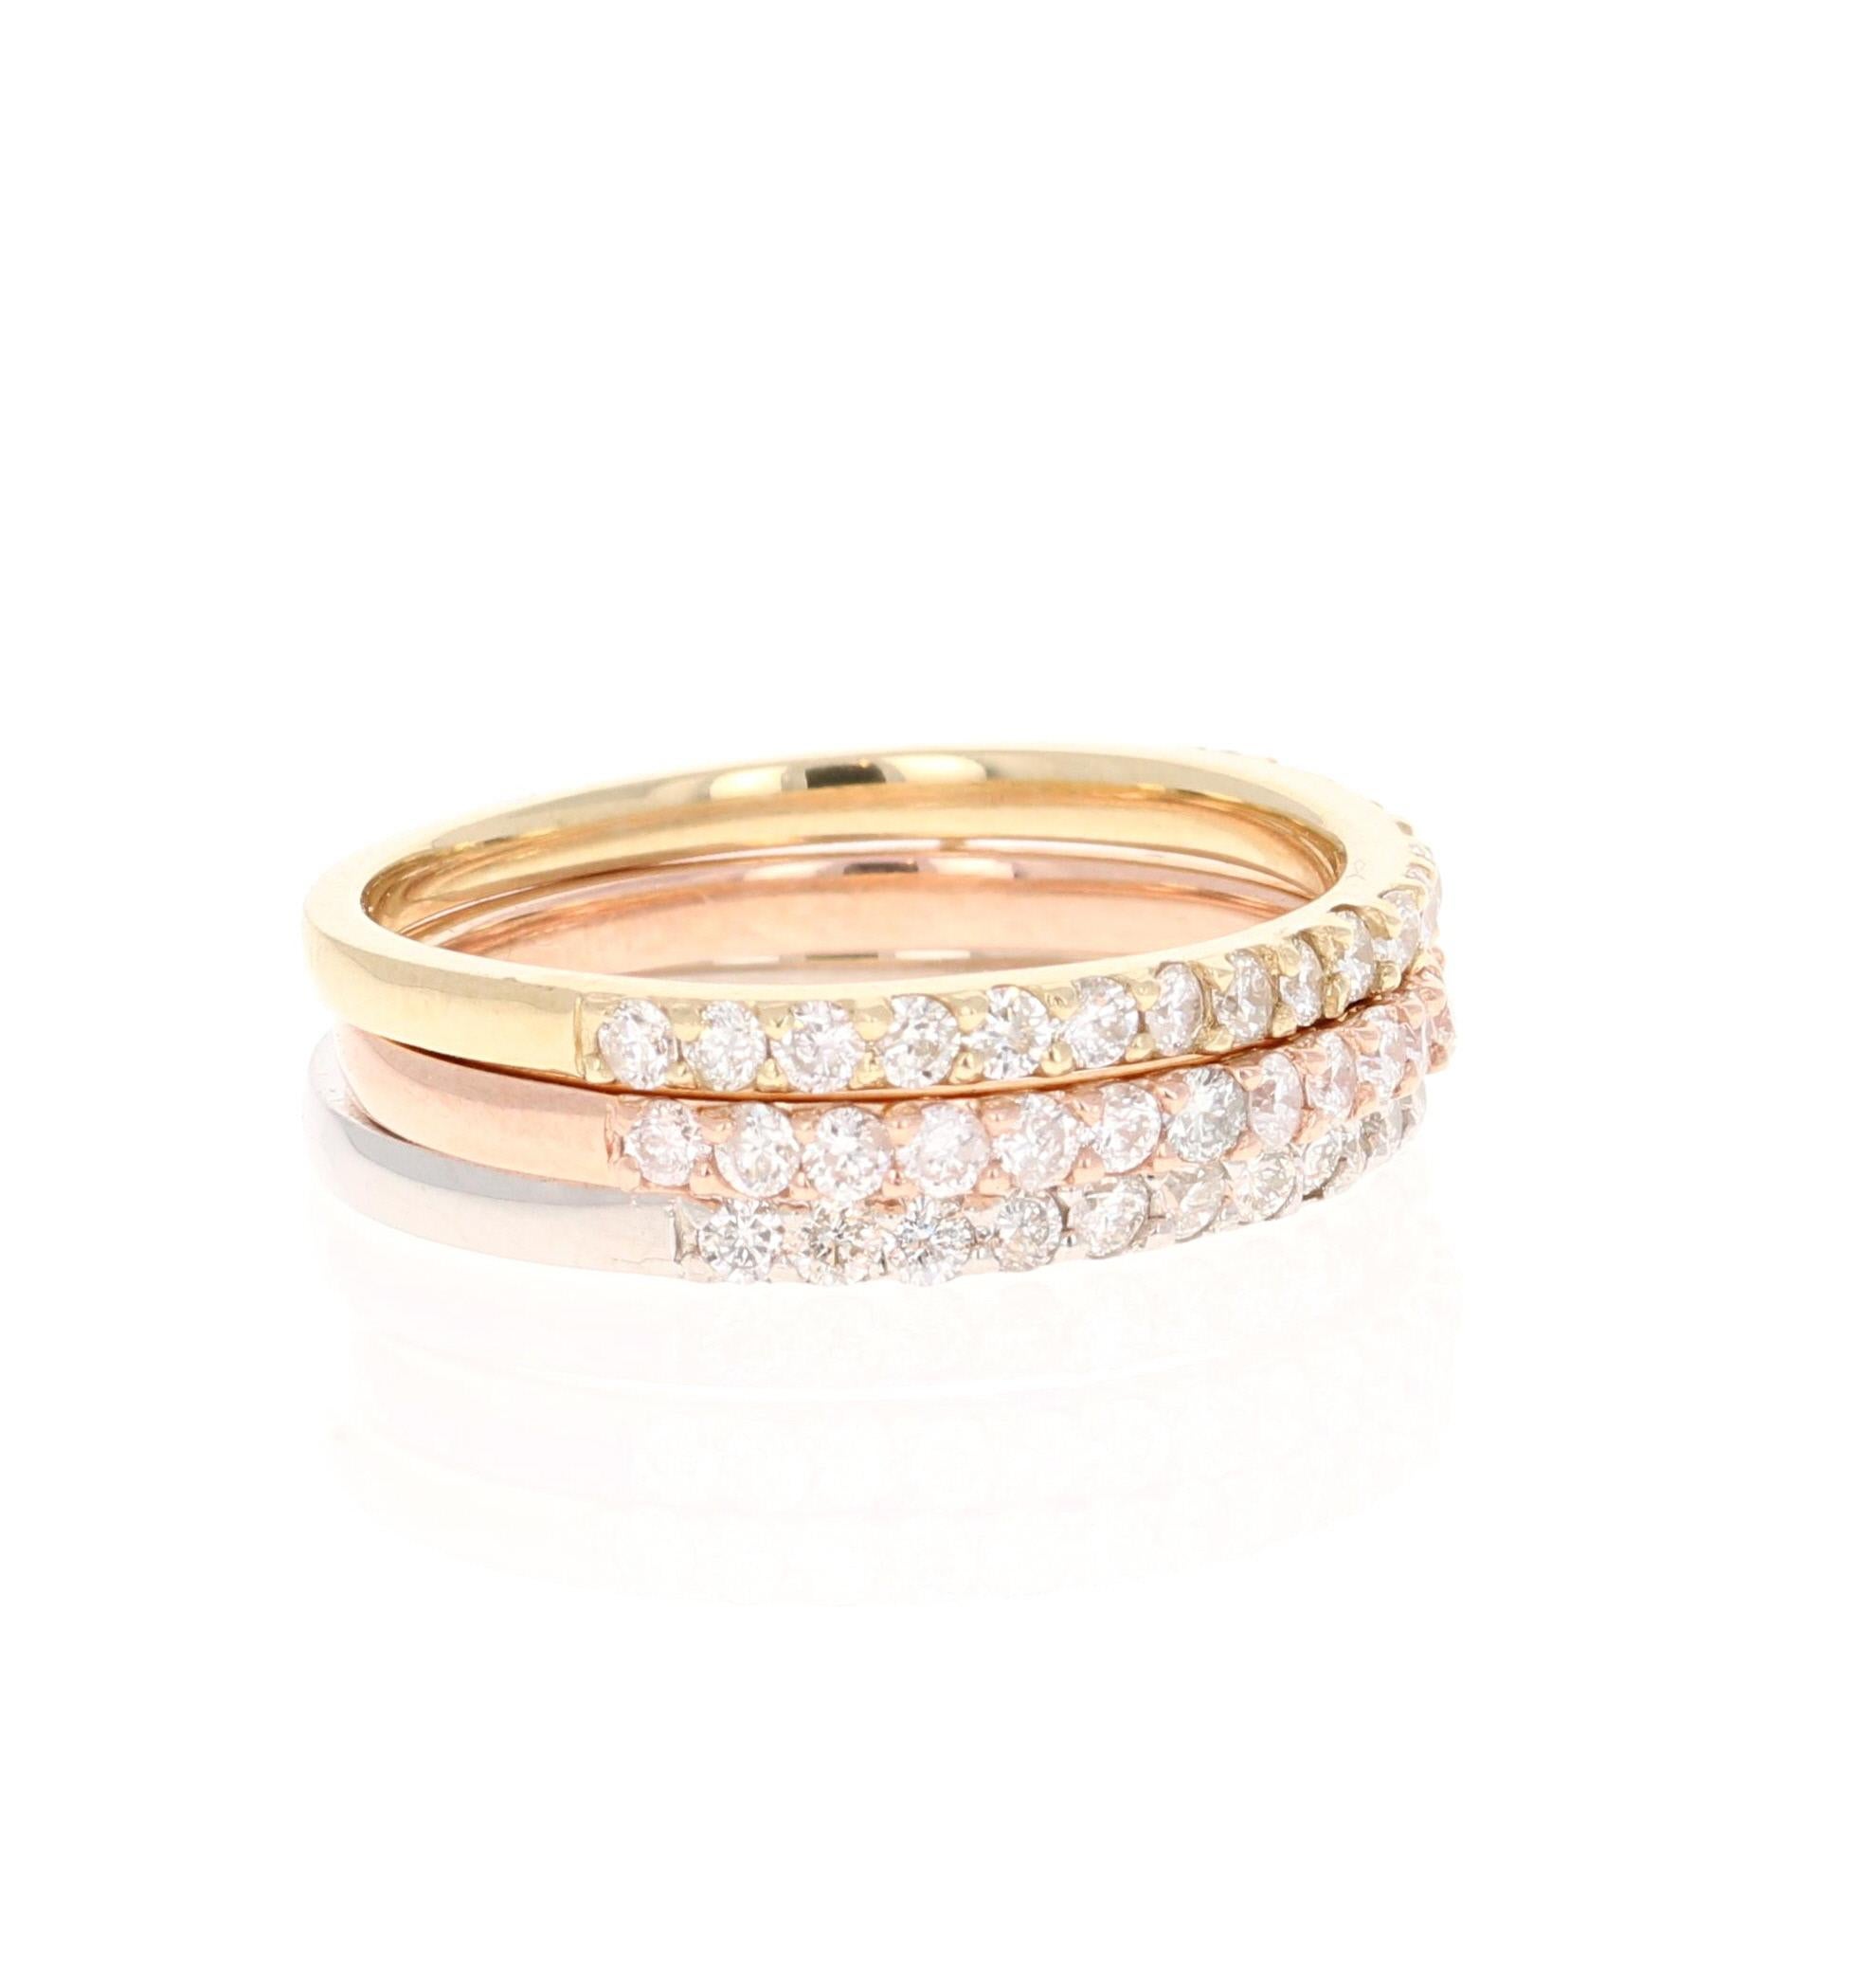 Cute and dainty 1.05 Carat Diamond Bands that are sure to be a great addition to anyone's accessory collection. Plus they can be worn altogether or separately. Stack 2 or 3 together or put a couple around a chain and wear them in your neck. You can